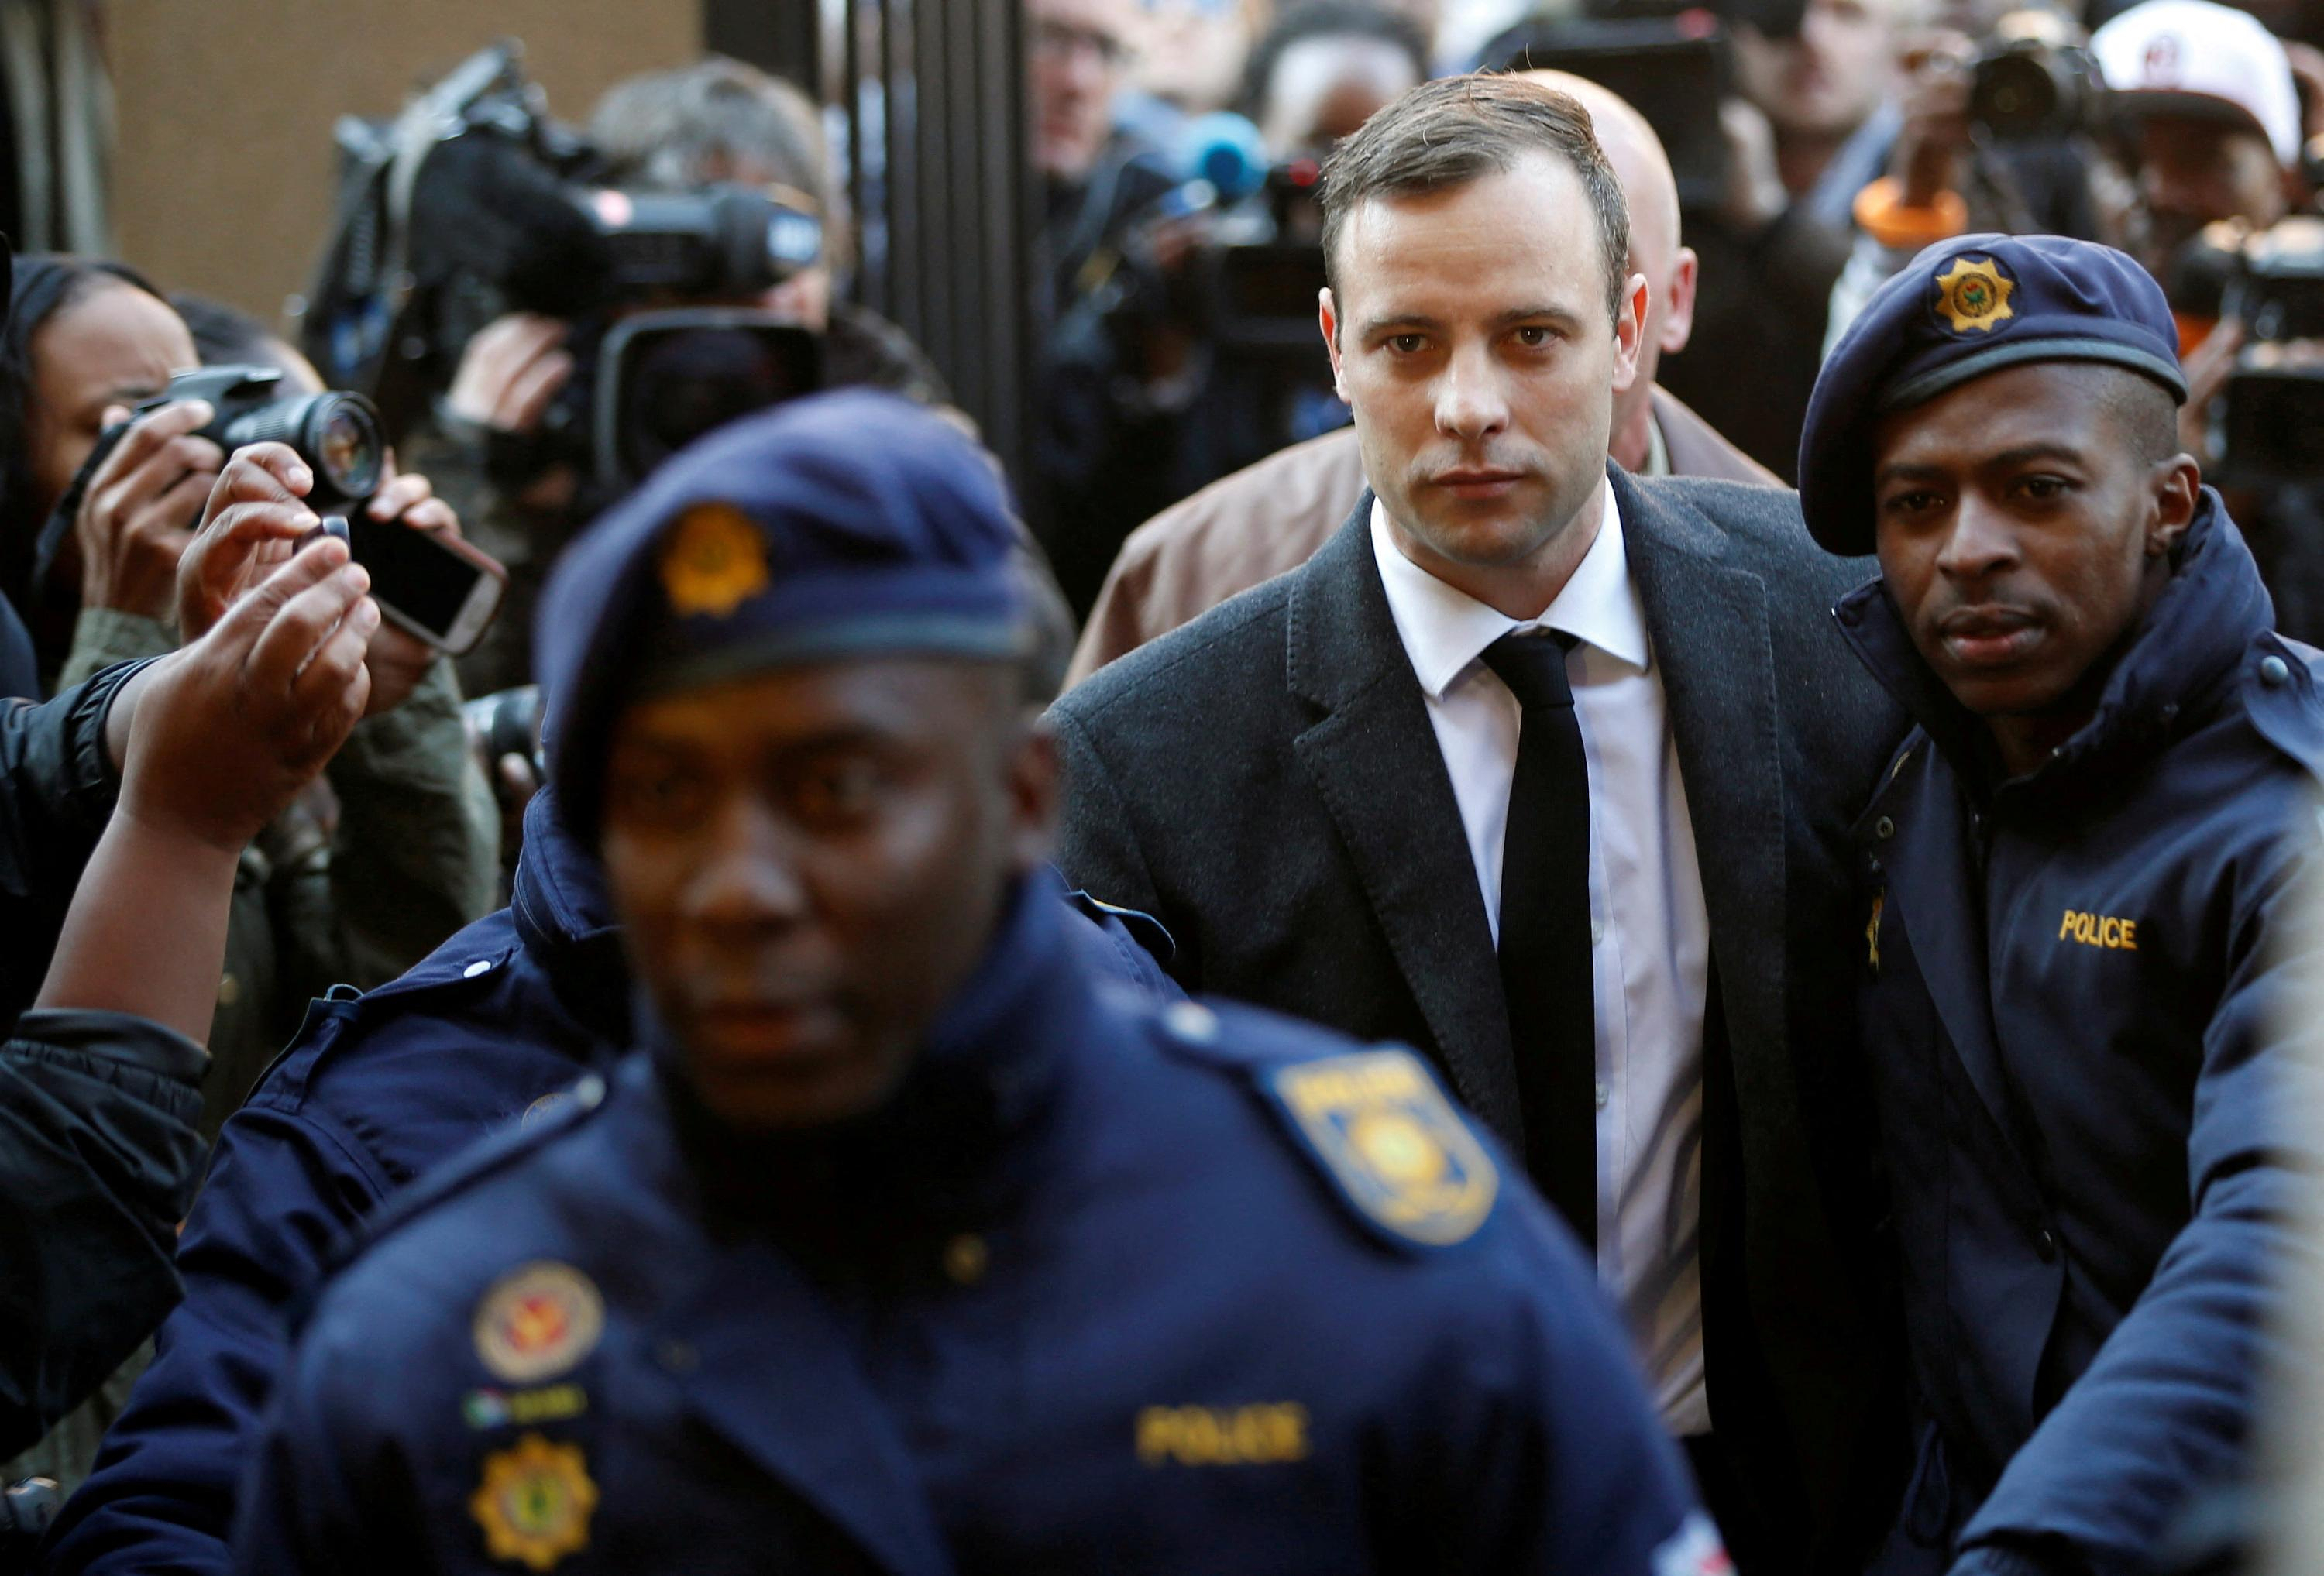 Oscar Pistorius will be released from prison on Friday